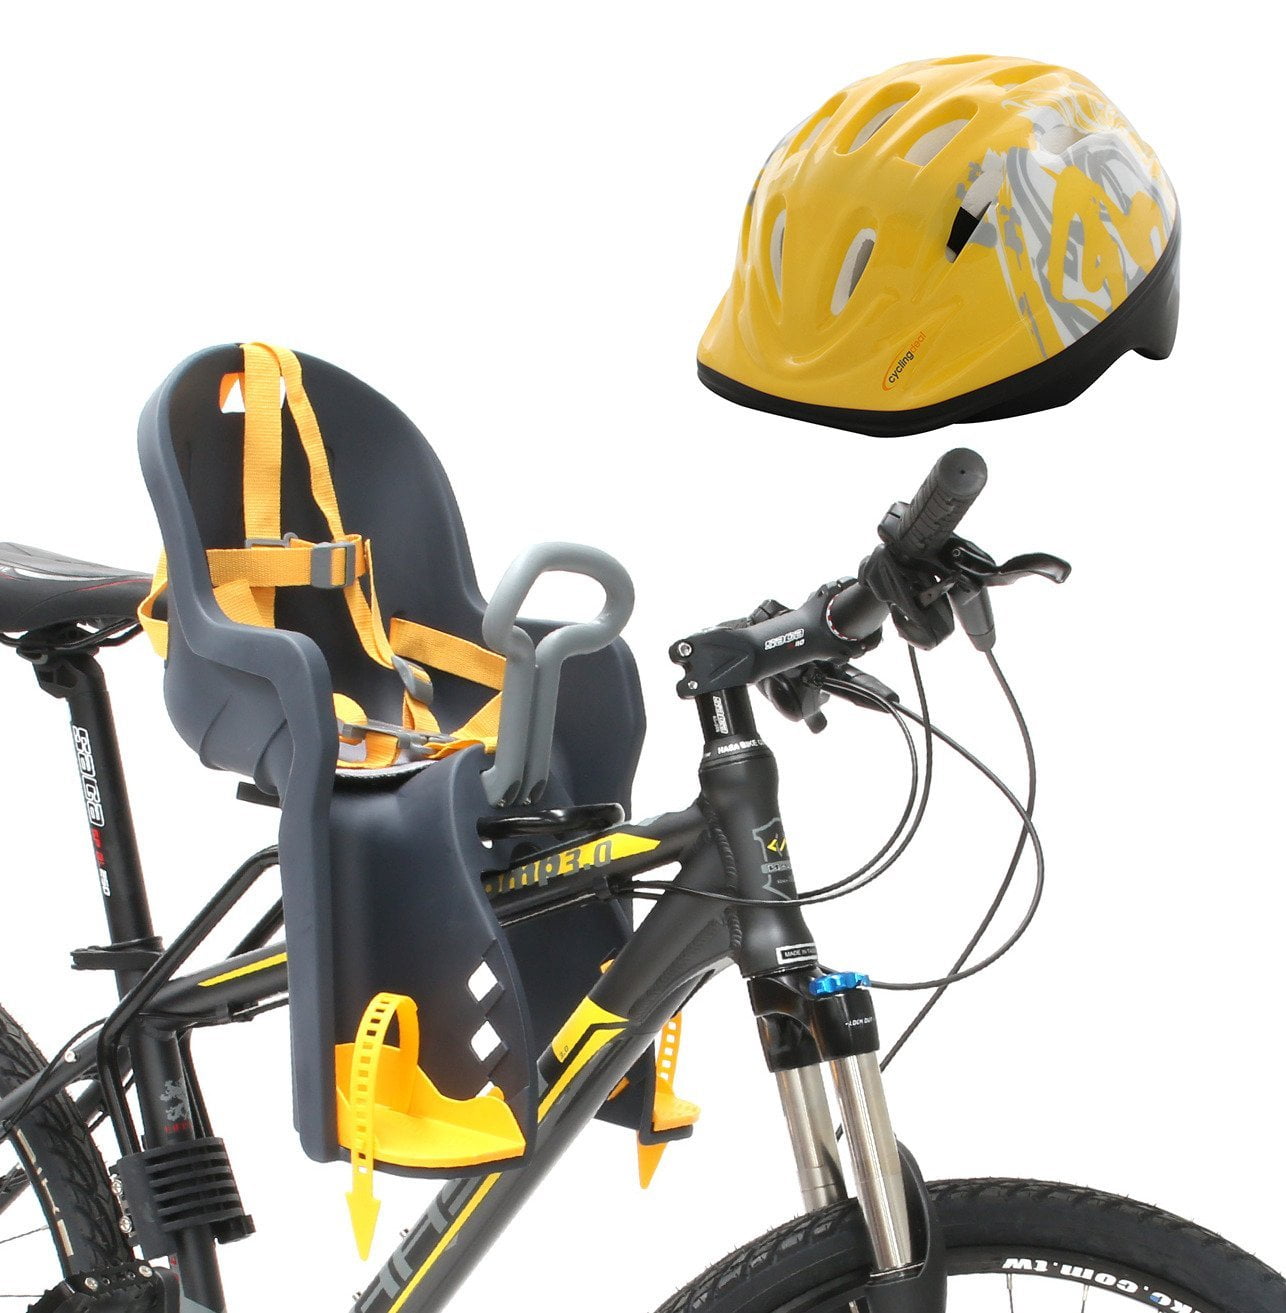 Child Front Carrier Baby Back Seat Chair MTB Bike Bicycle Security Kids Handrail